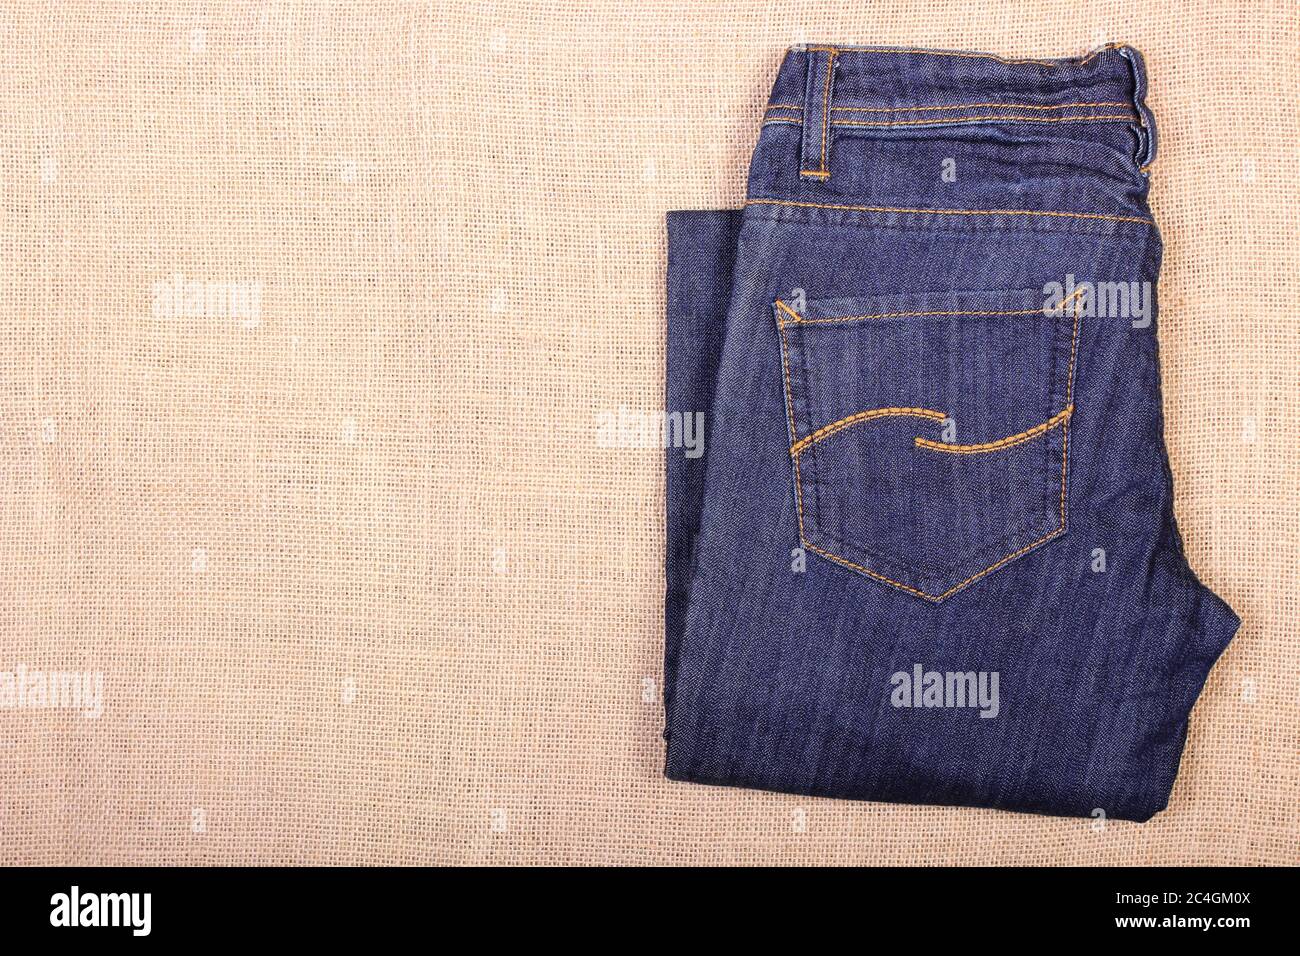 Pair of pants jeans on jute burlap, womanly clothing, place for text or inscription Stock Photo